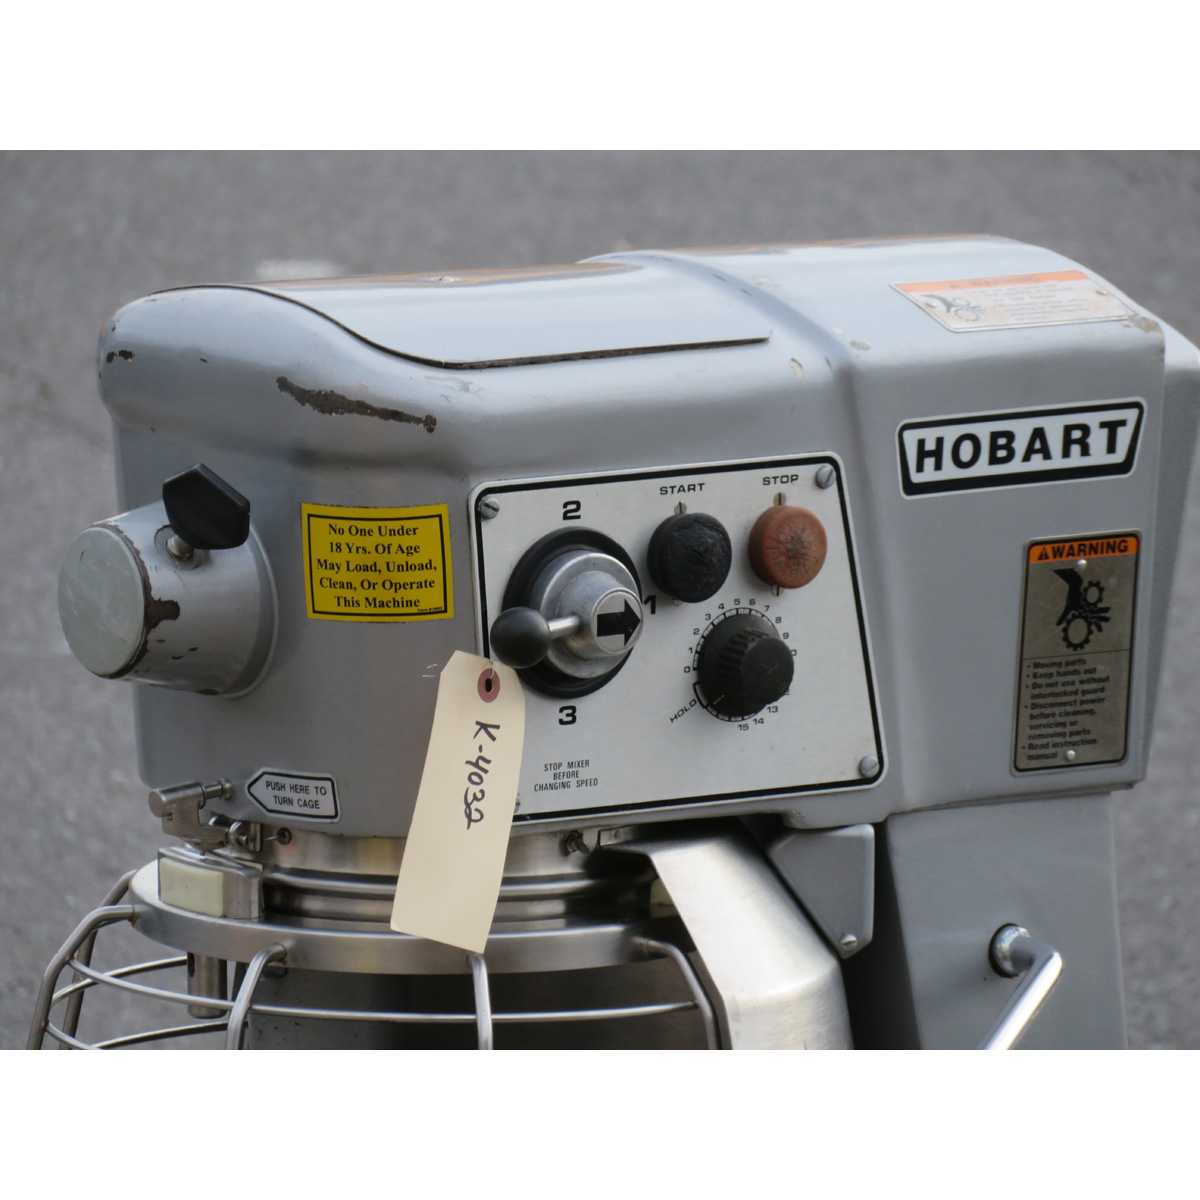 Hobart 30 Quart D300T Mixer 115V with Bowl Guard & Timer, Used Great Condition image 1